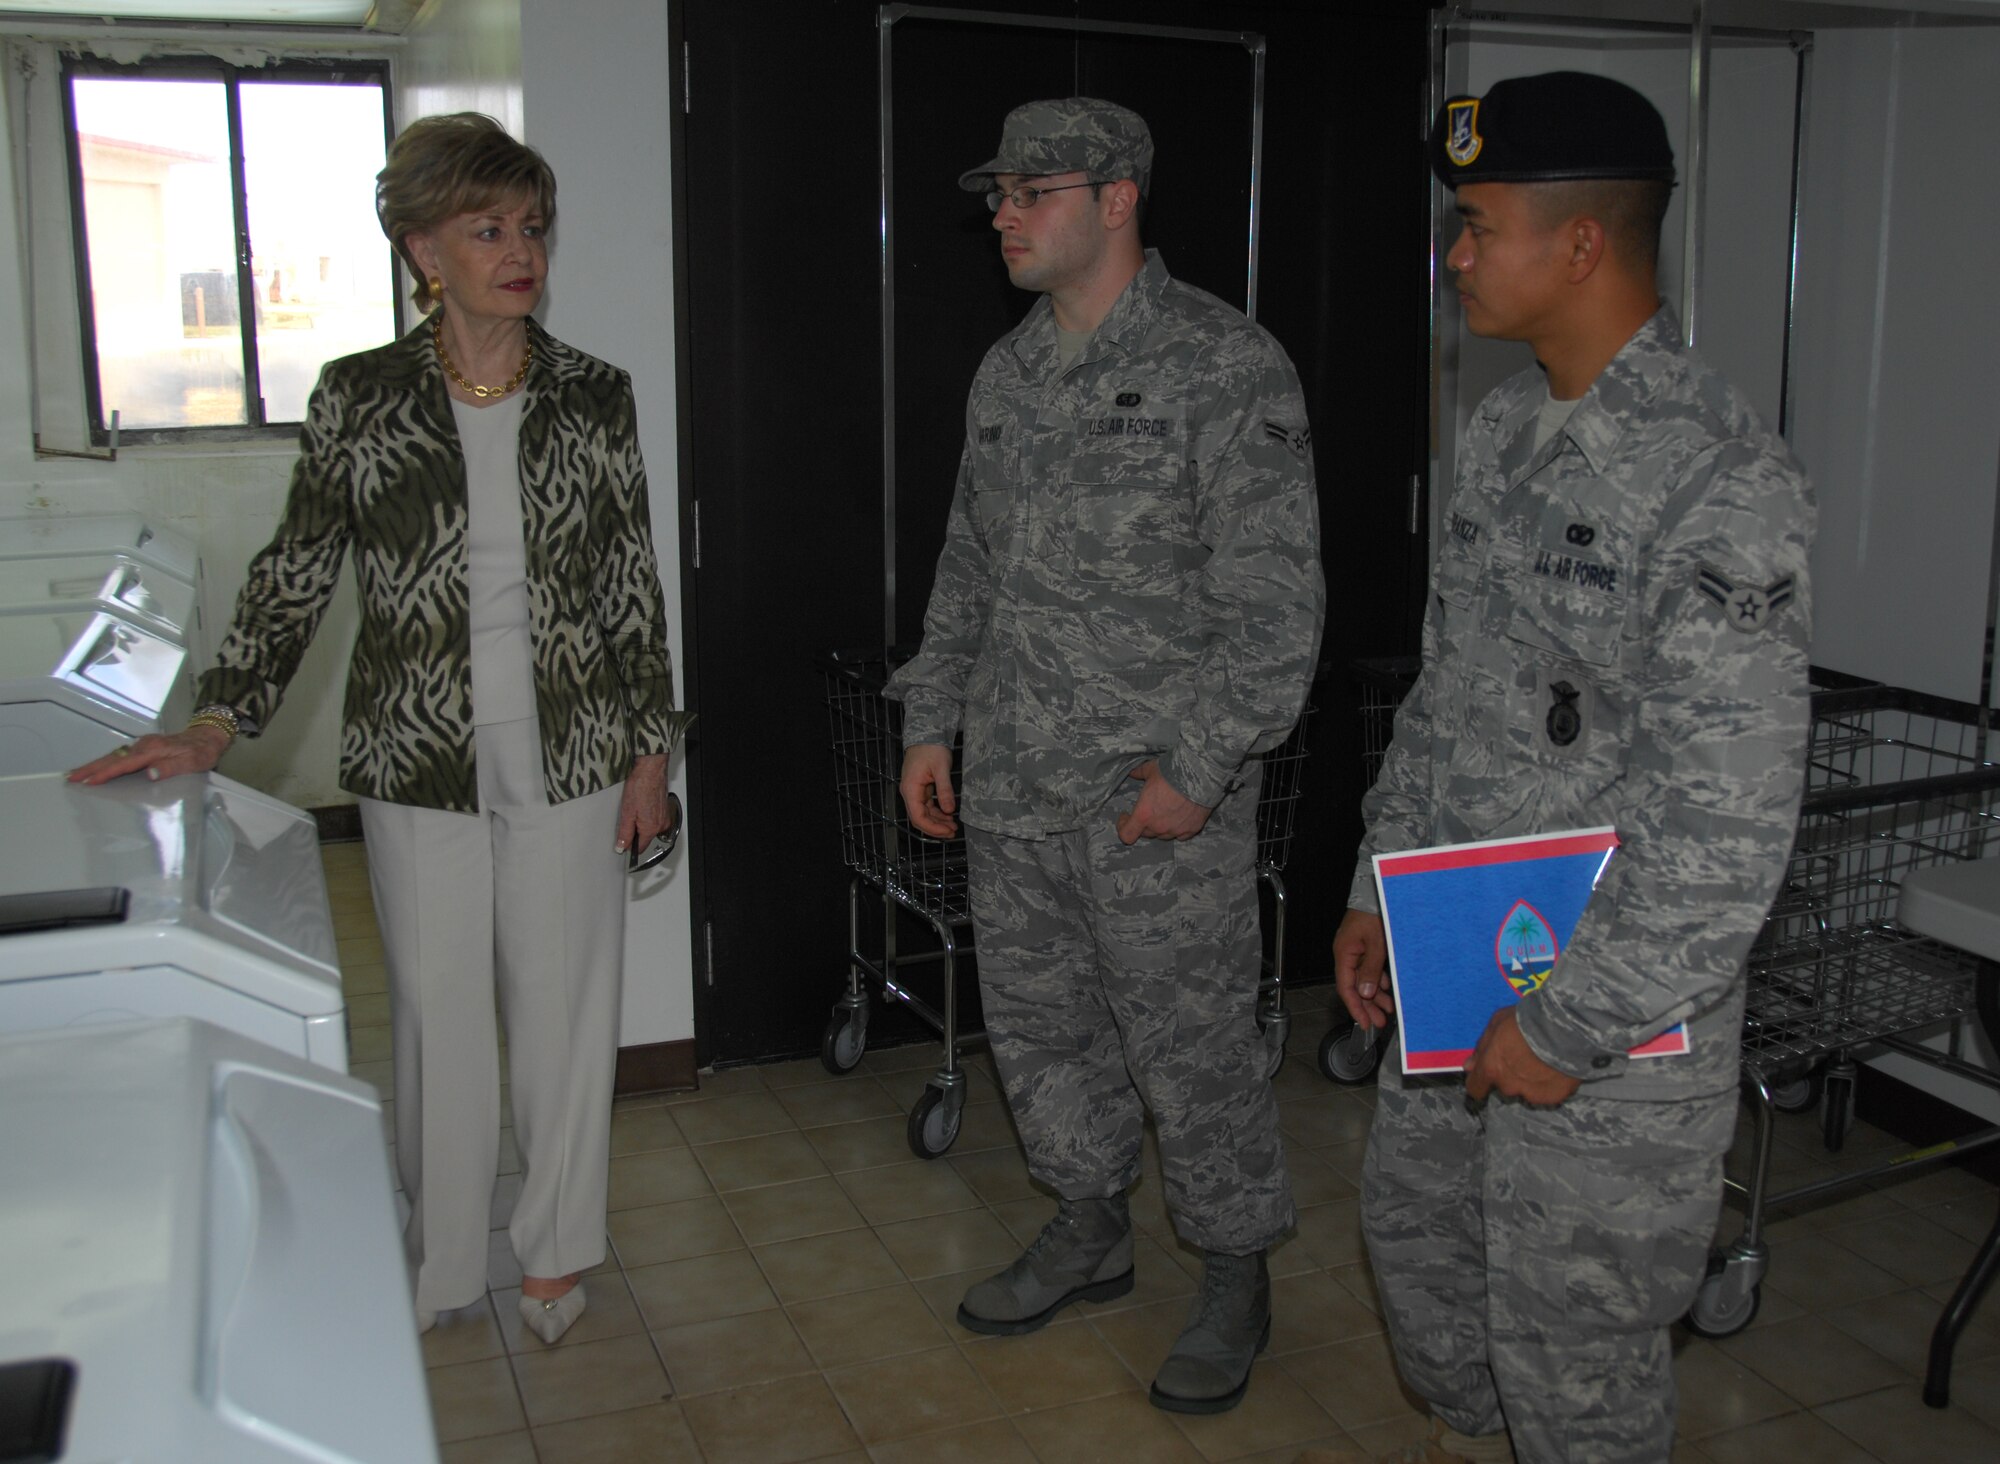 ANDERSEN AIR FORCE BASE, Guam - Congresswoman Madeliene Bordallo tours Tinian Hall with Airmen 1st Class Dominic Marino and Neil Carranza, from the 36th Force Support Squadron and 36th Security Forces Squadron respectively, Feb. 17. Twelve members of Congress received a first-hand look at the living conditions of Airmen on Andersen AFB, Guam. (U.S. Air Force photo by Senior Airman Shane Dunaway)